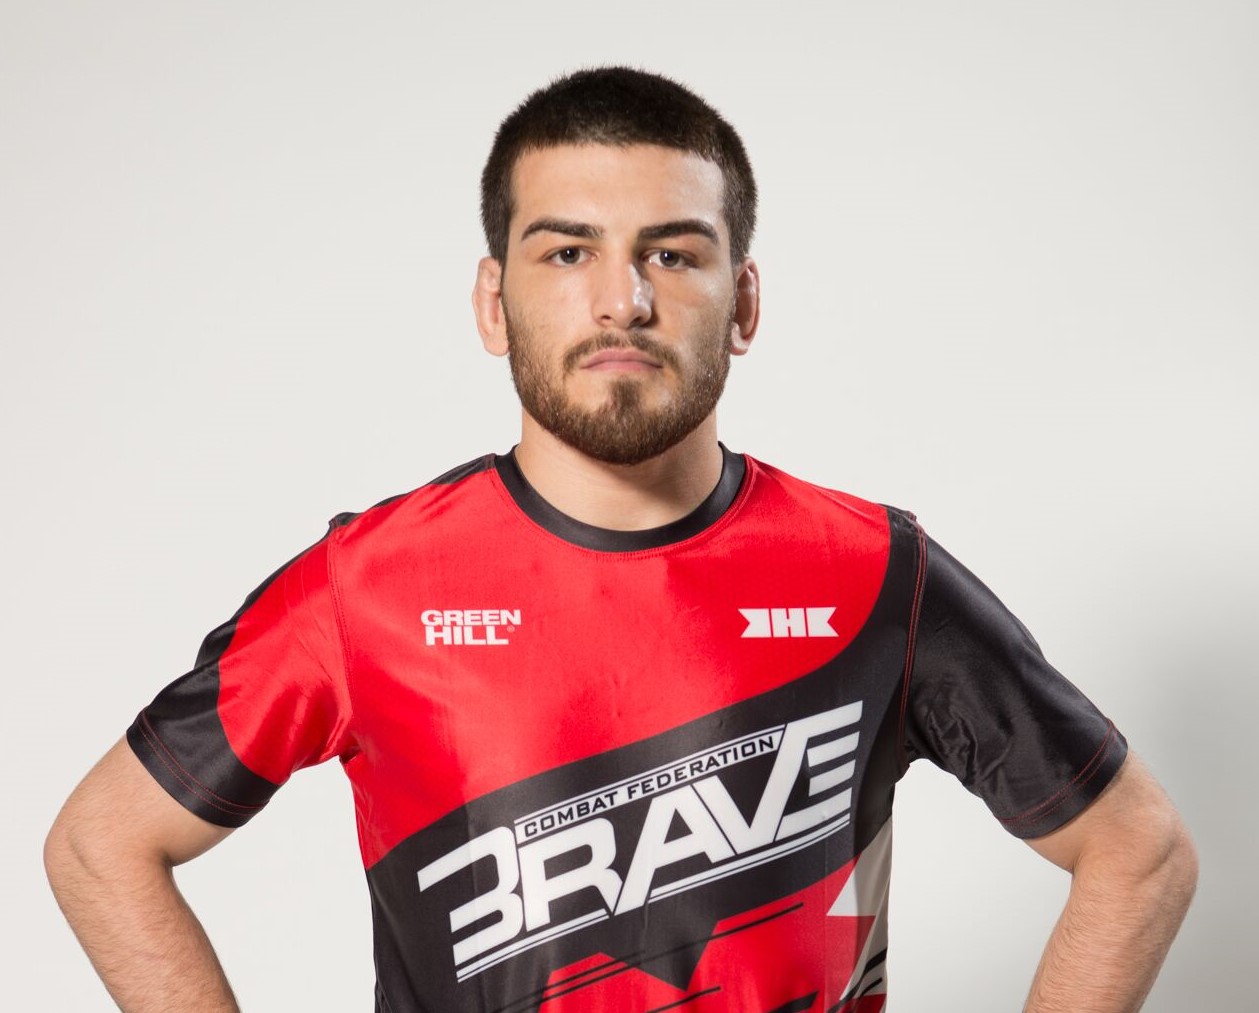 BRAVE CF LIVE CHAT - Jose "Shorty" Torres and Carlos Kremer discuss fighter care -